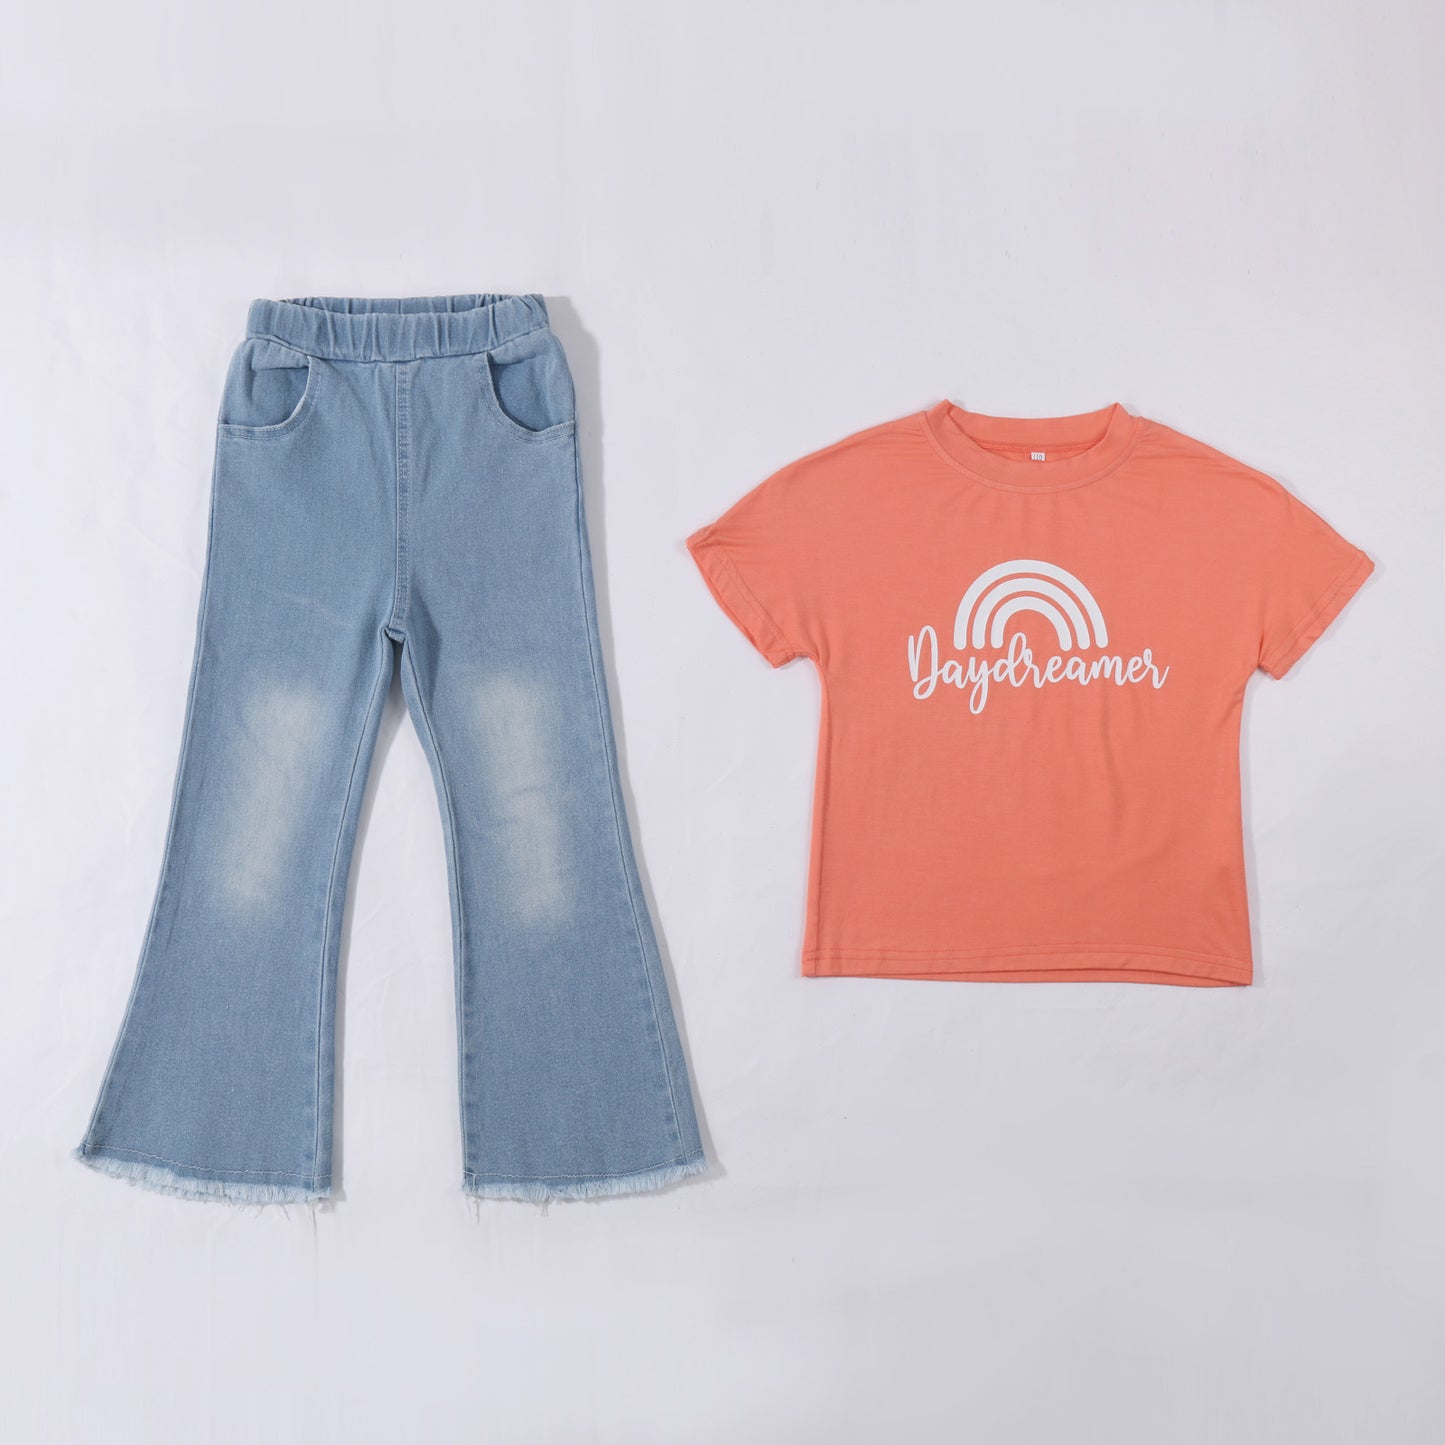 Girl's Rainbow "Daydreamer" T-shirt & Washed Jeans